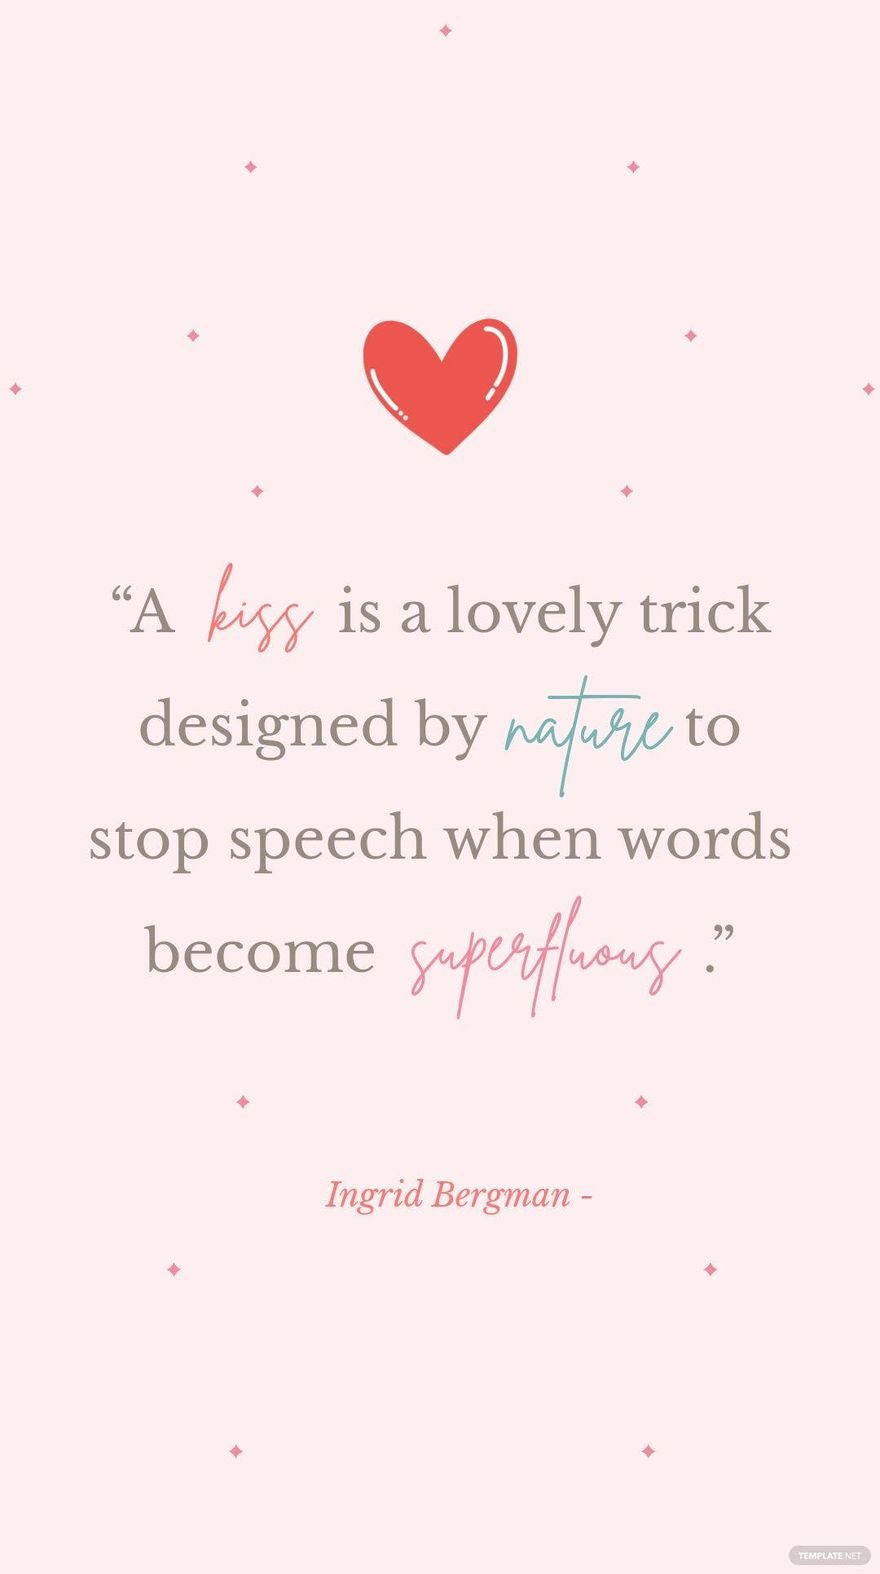 Ingrid Bergman - “A kiss is a lovely trick designed by nature to stop speech when words become superfluous.”